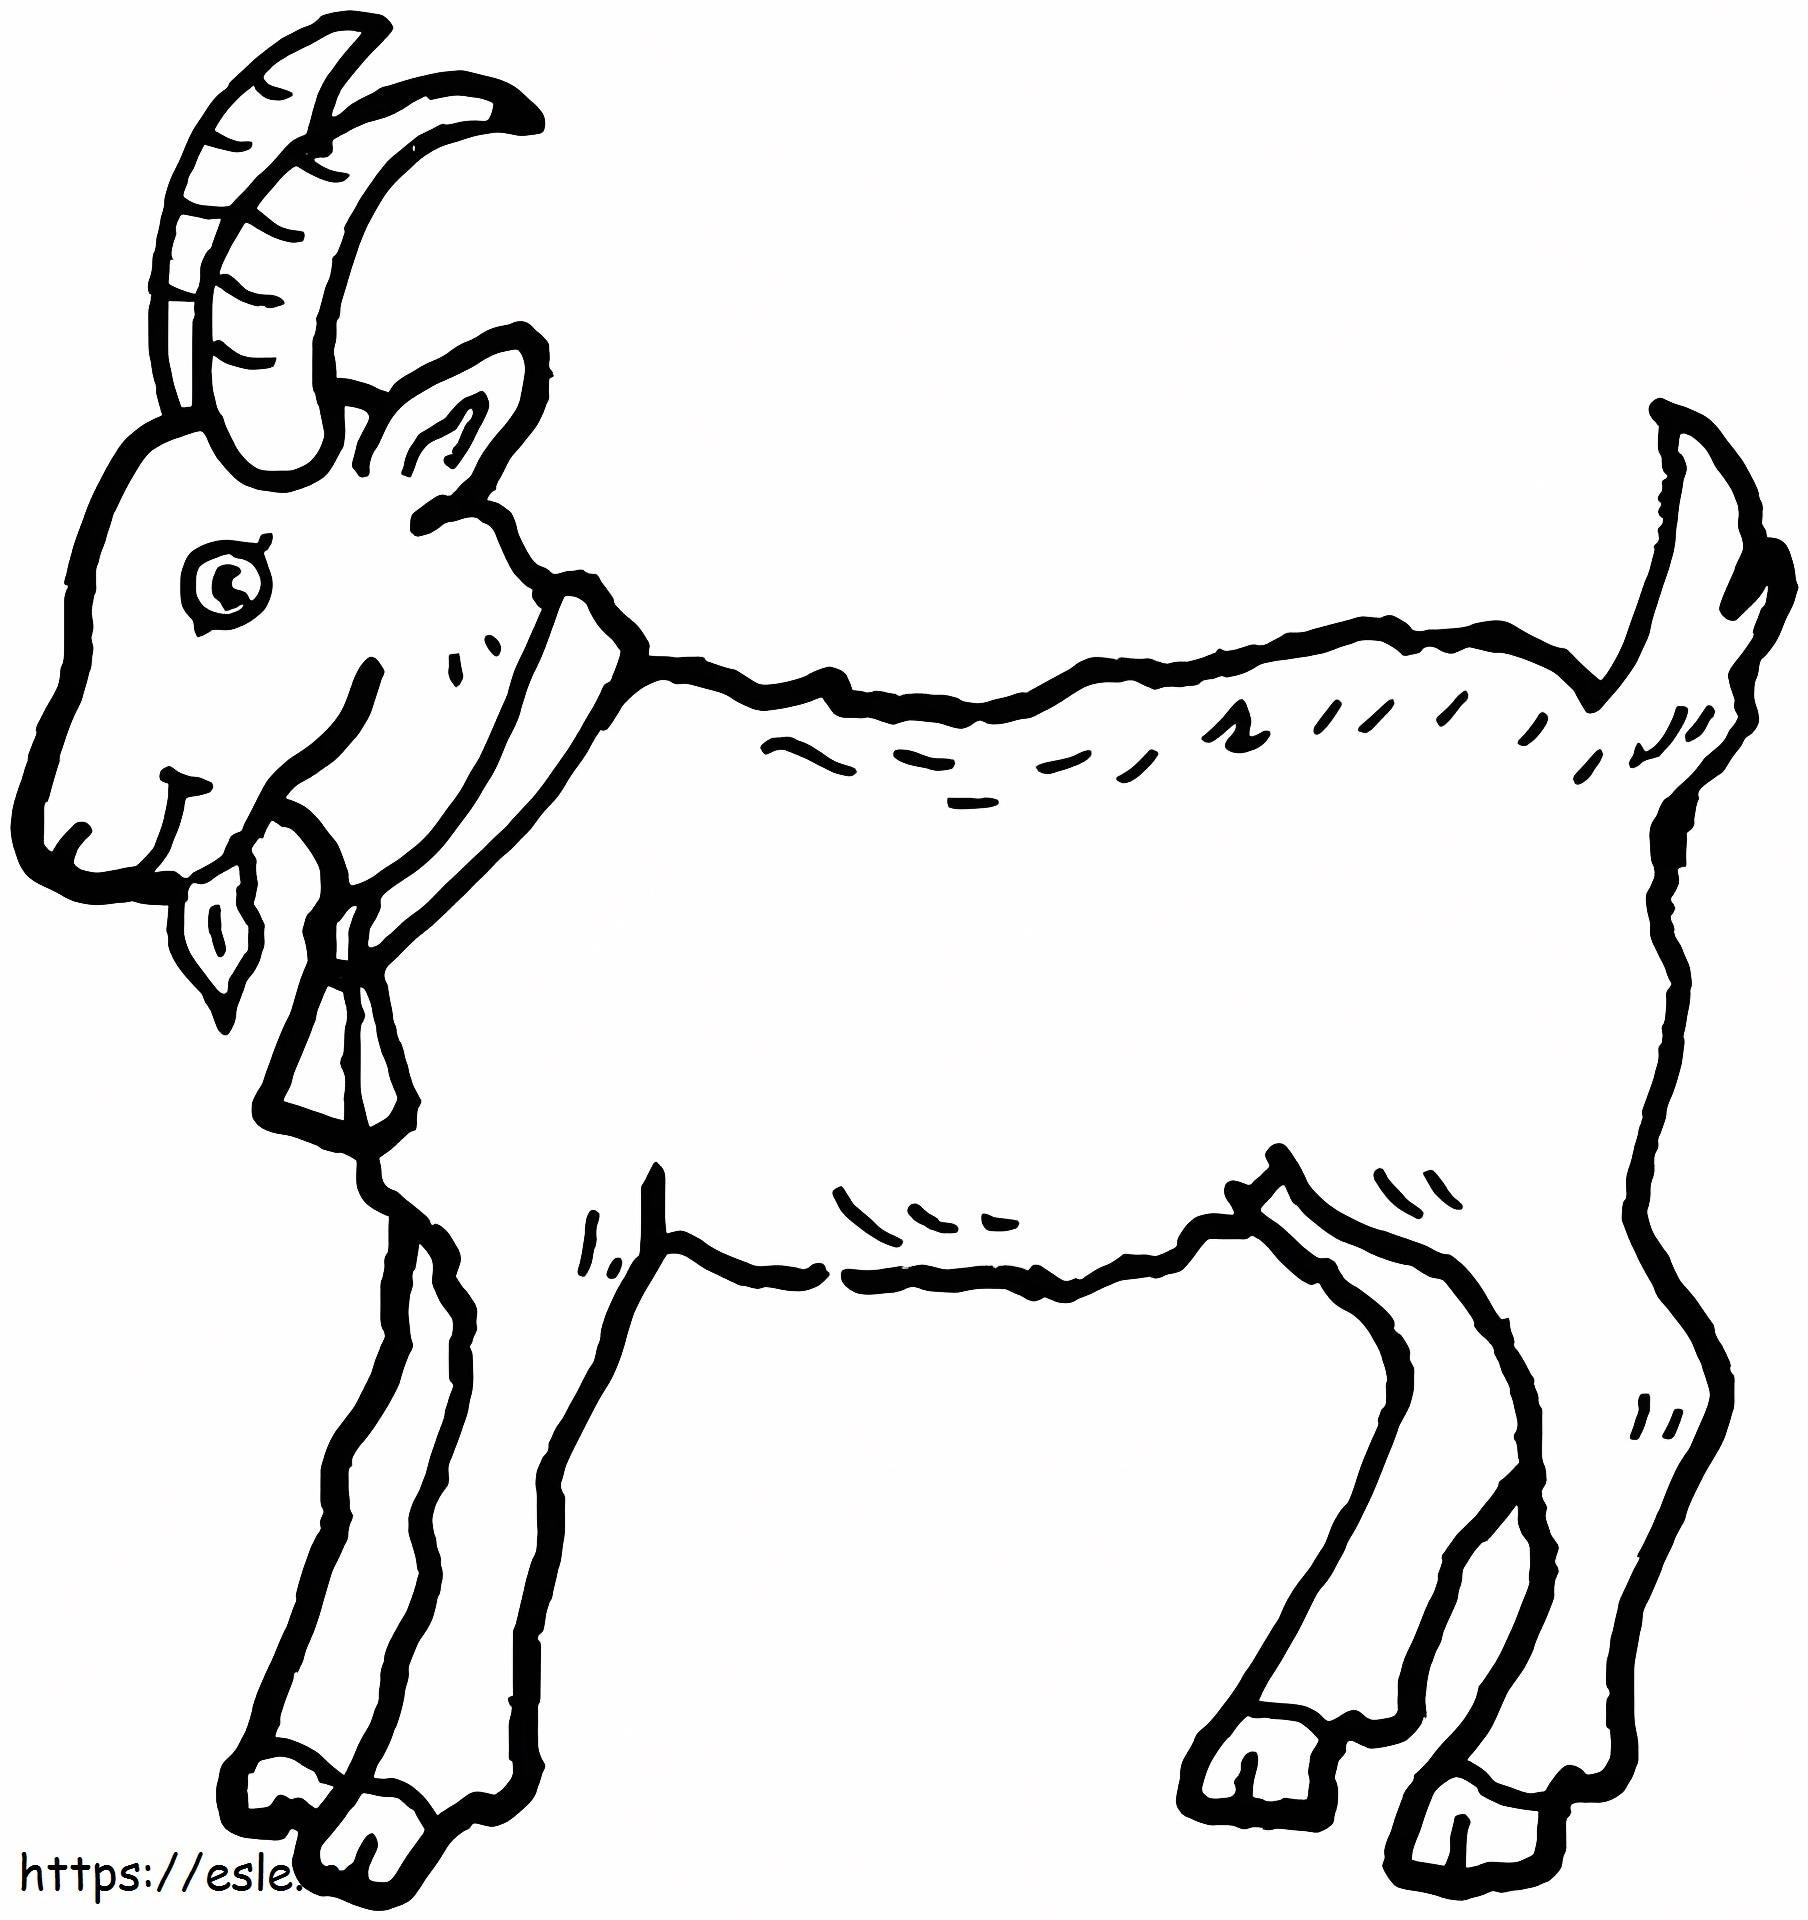 Basic Goat coloring page